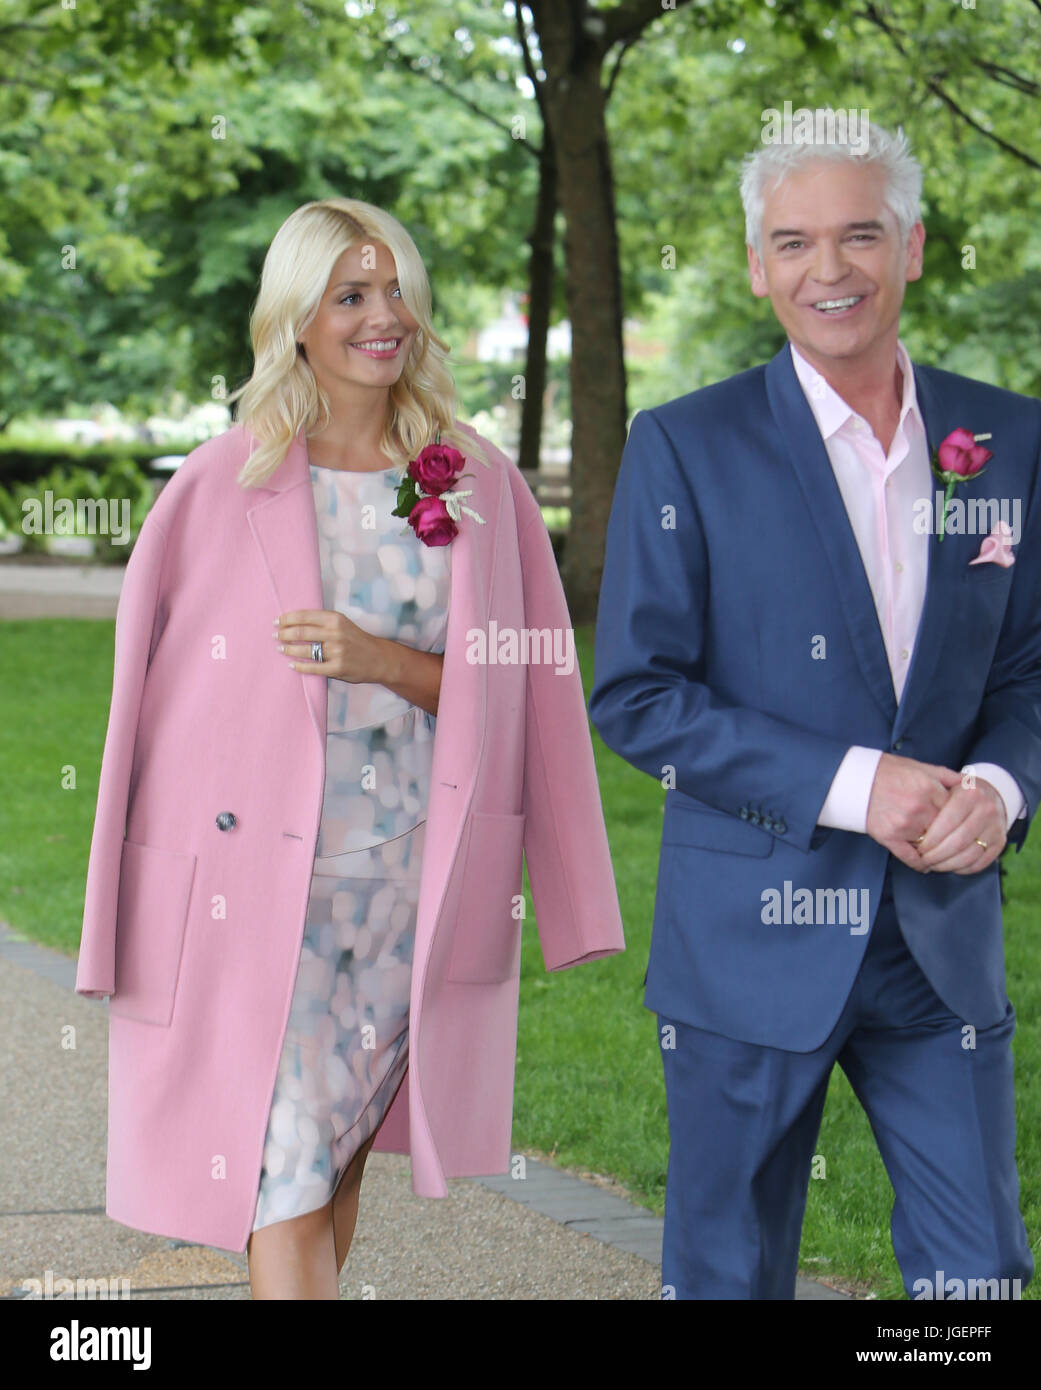 Holly Willoughby And Philip Schofield Filming A Rehearsal Of An Upcoming Live Wedding On The 